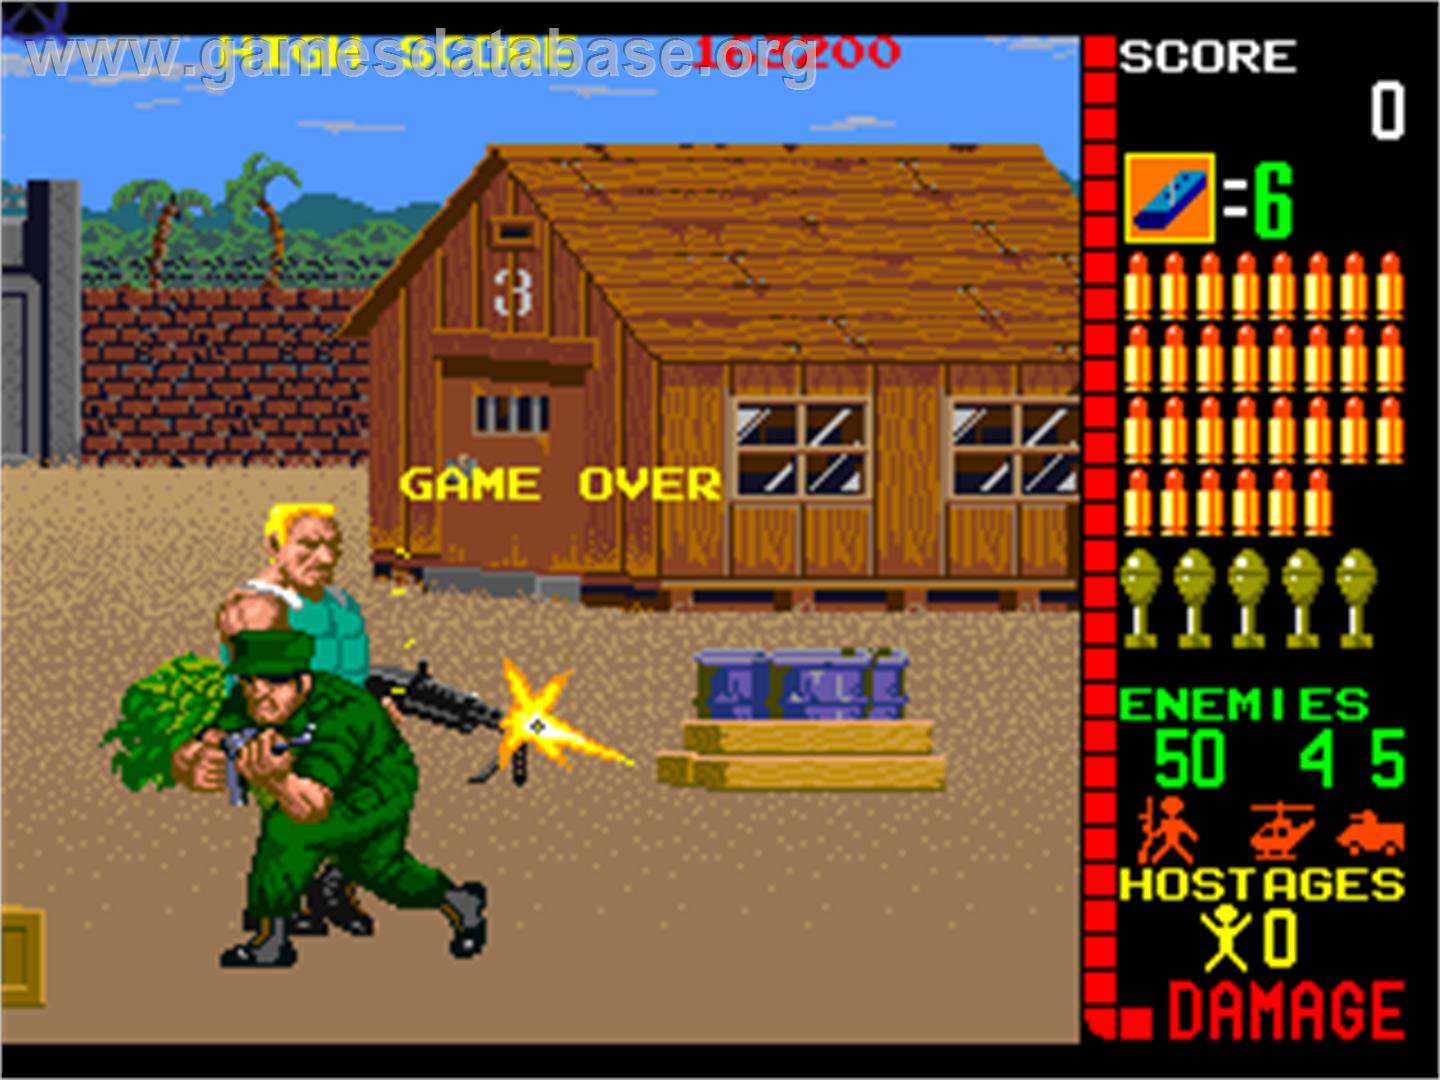 Operation Wolf - Arcade - Artwork - Game Over Screen